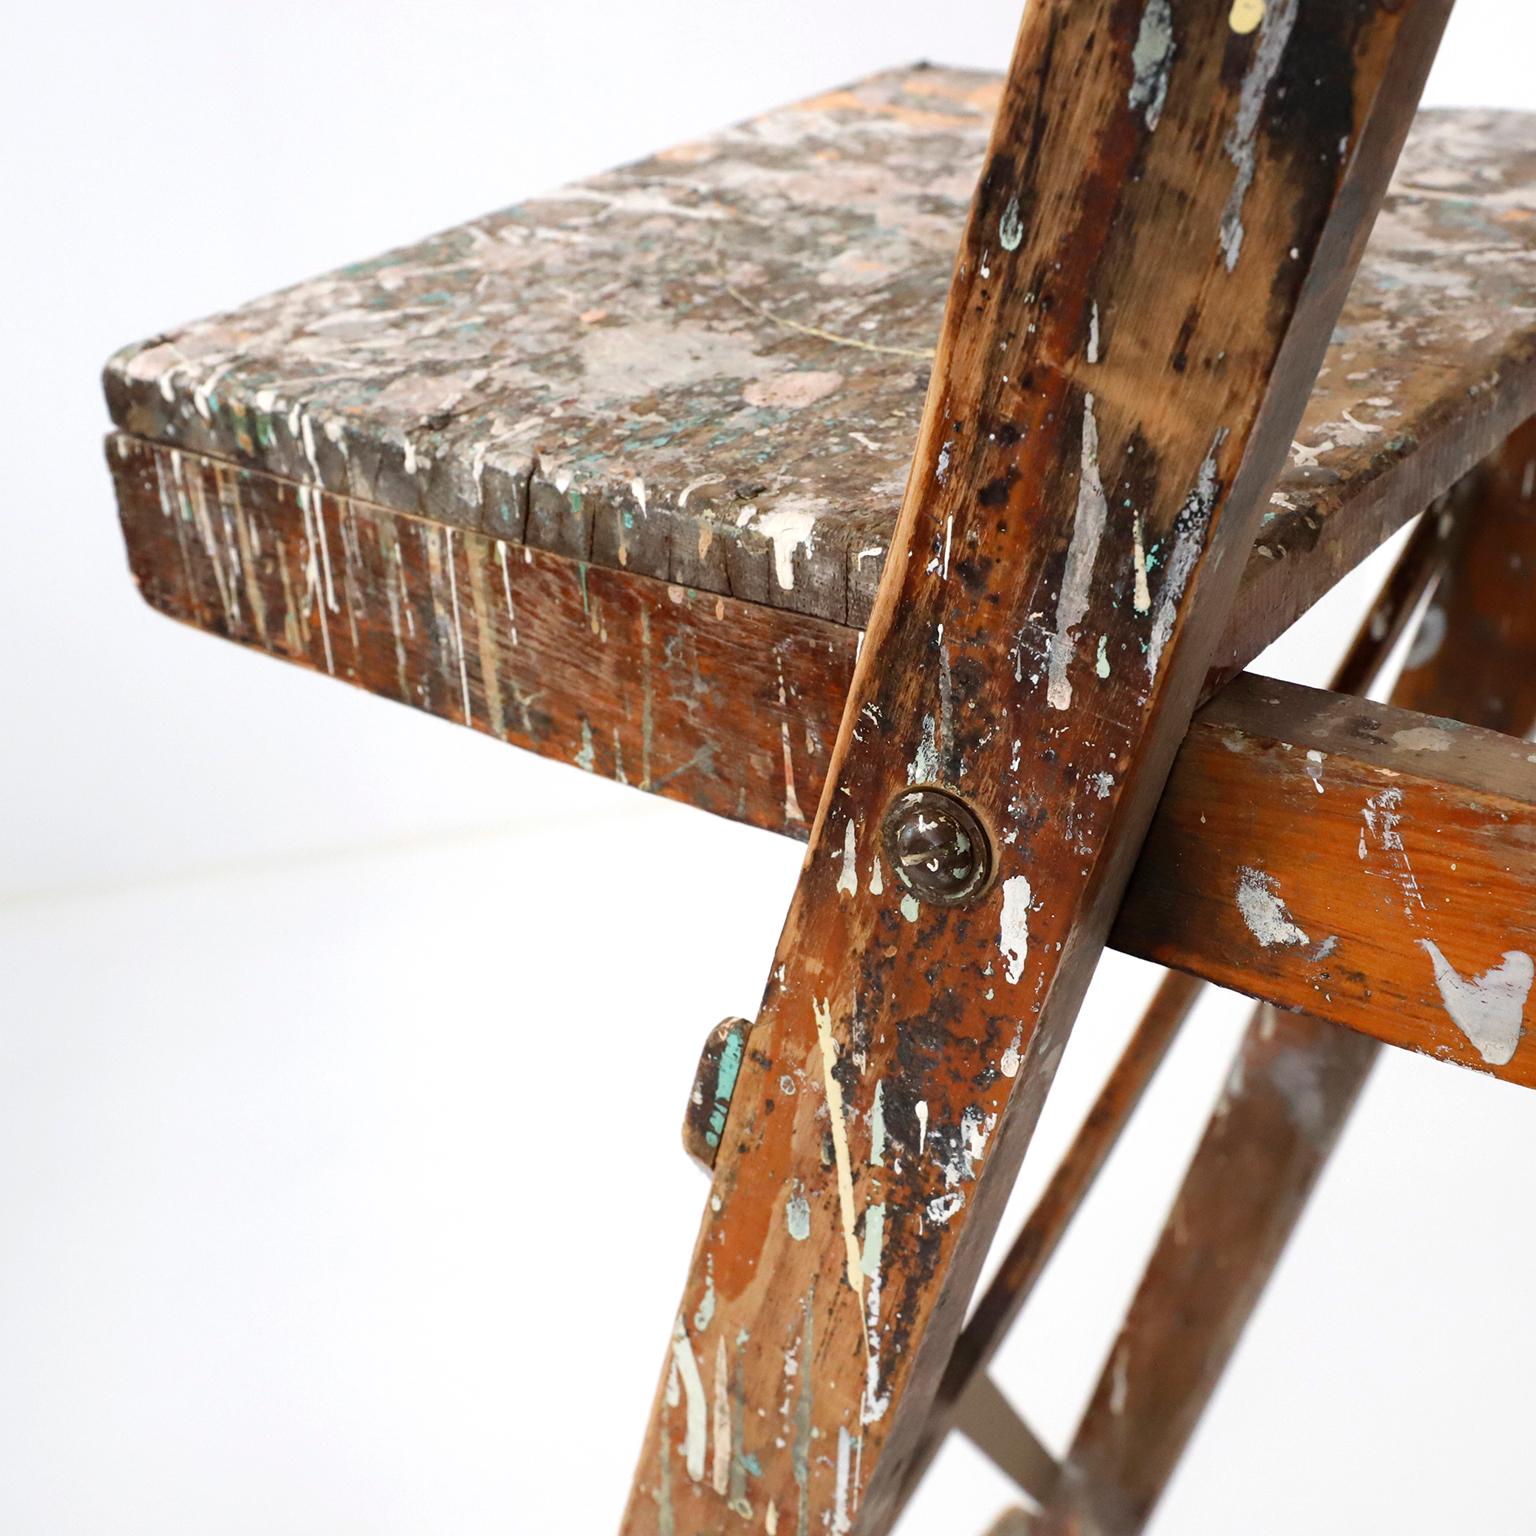 Circa 1960. We are delighted to offer this lovely painted original pine ladder
A good looking and decorative piece.
  